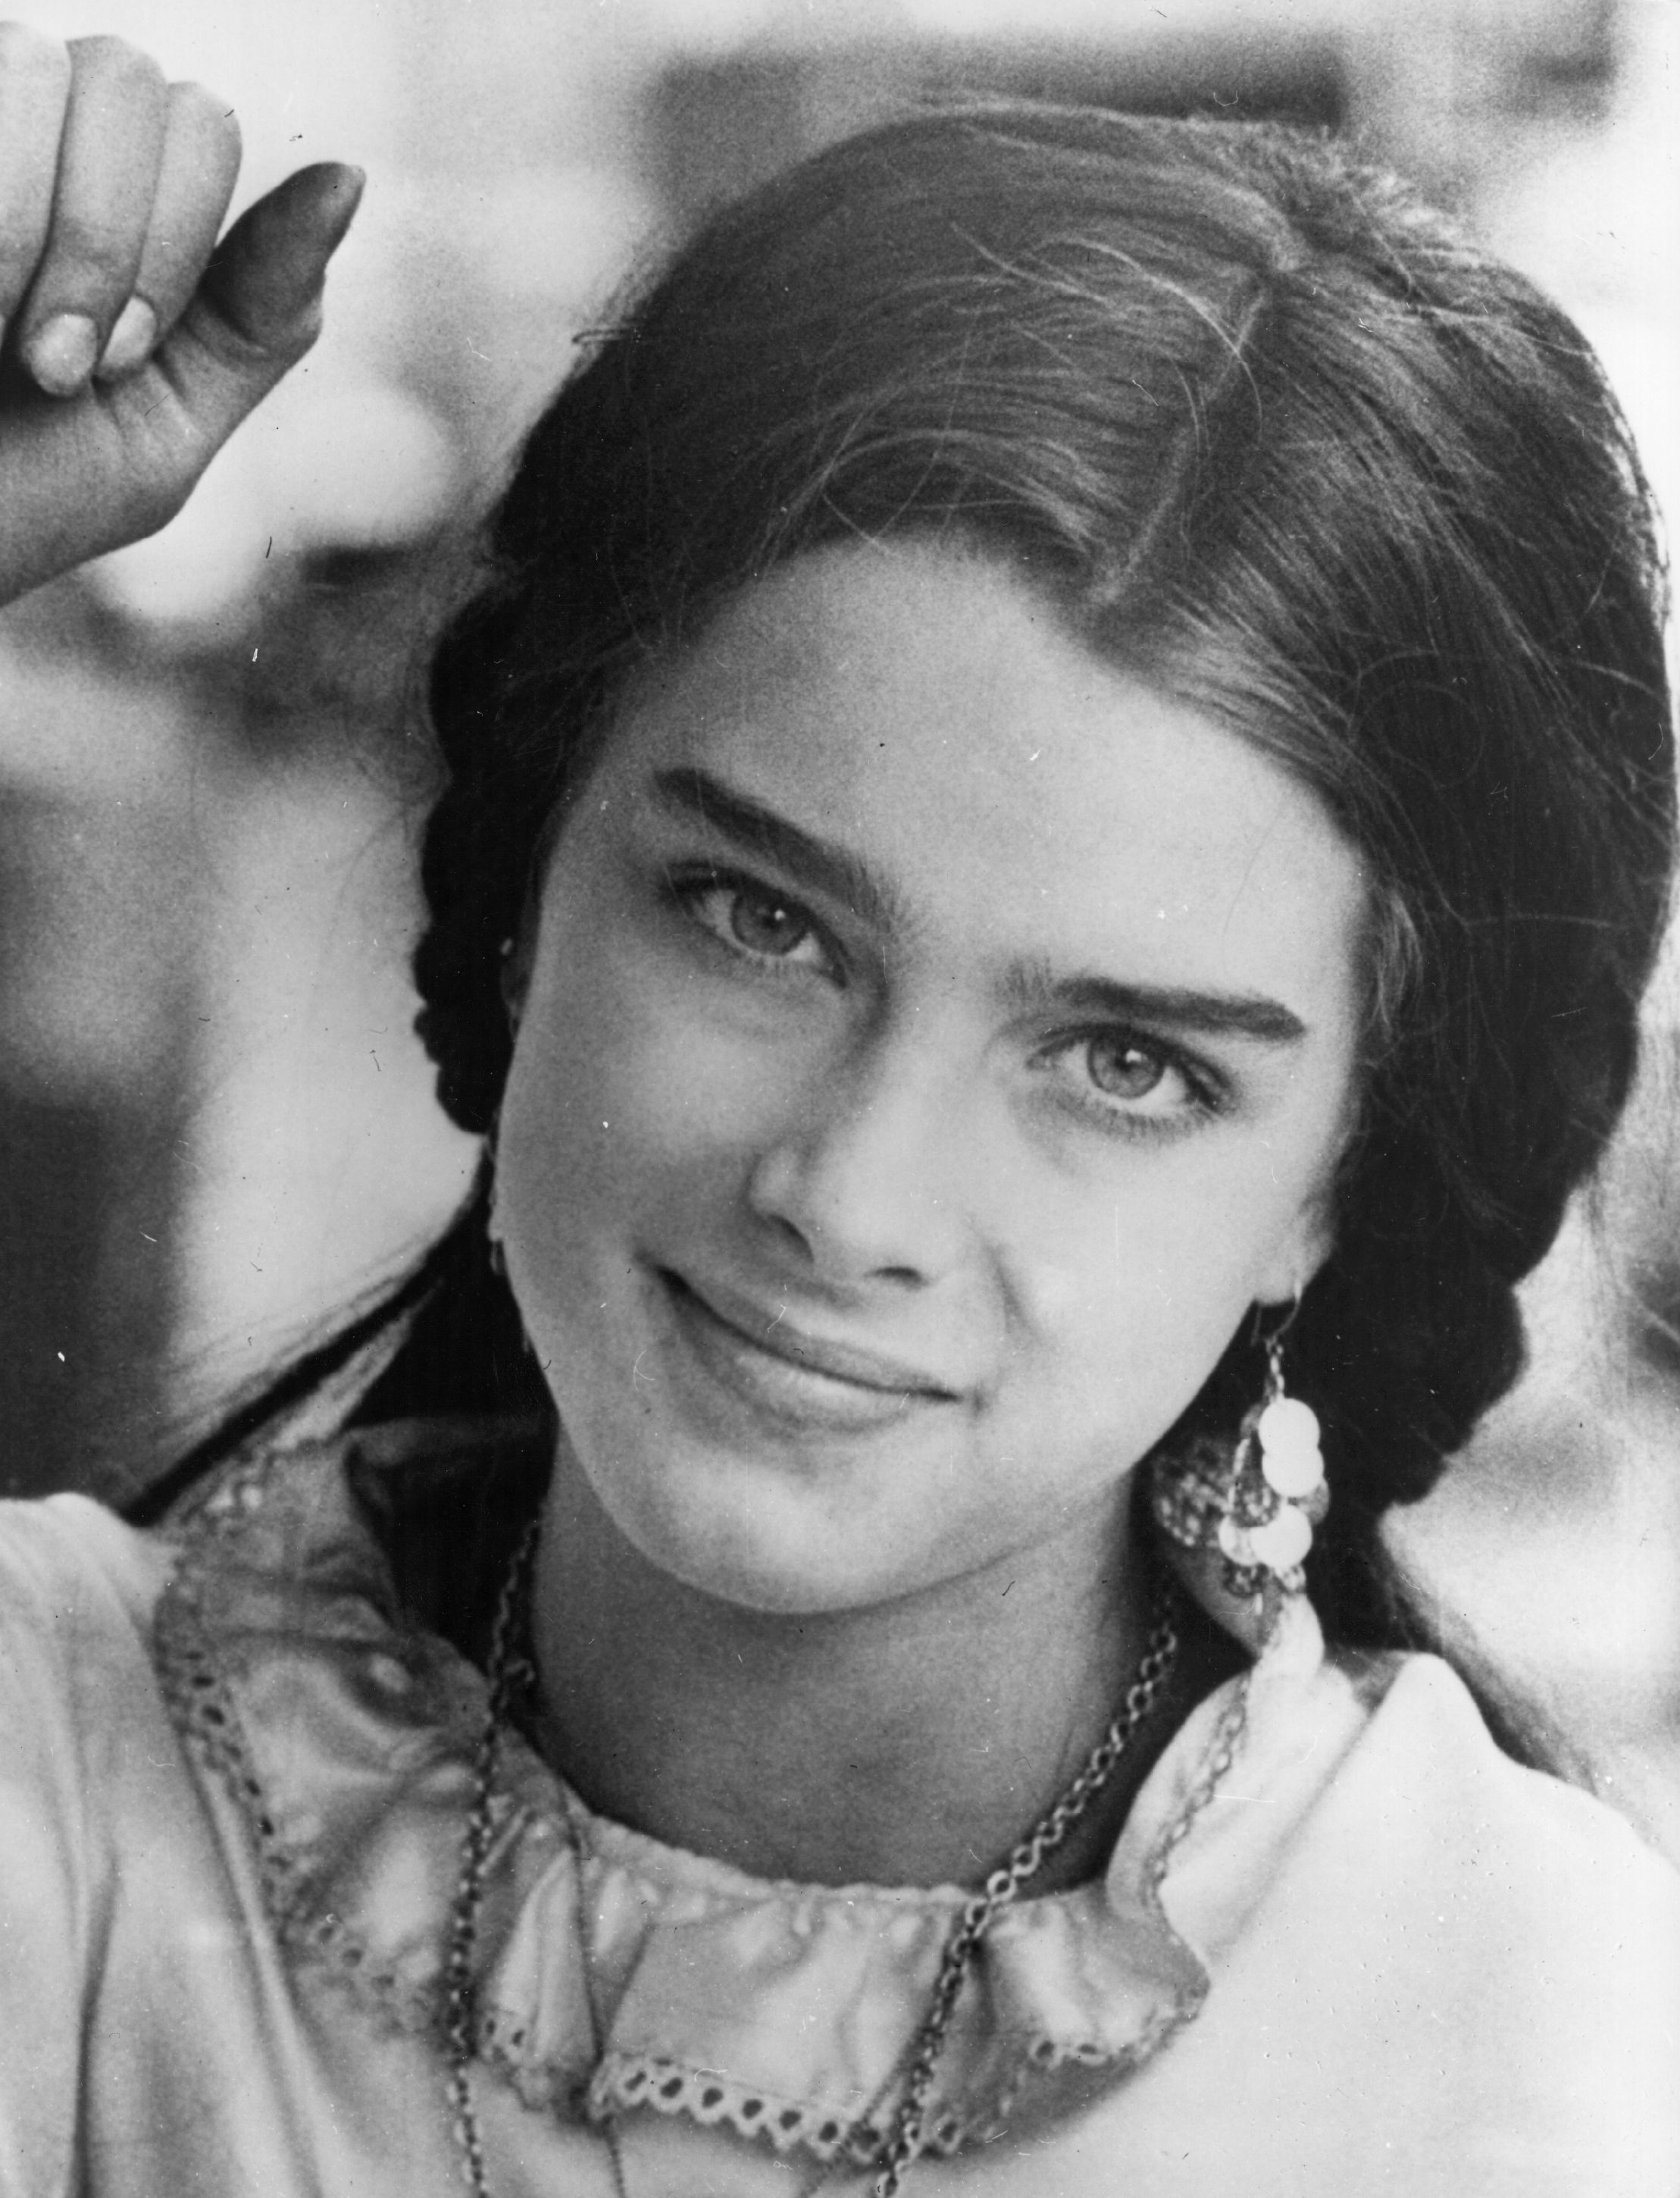 Brooke Shields' portrait from 1970. | Source: Getty Images